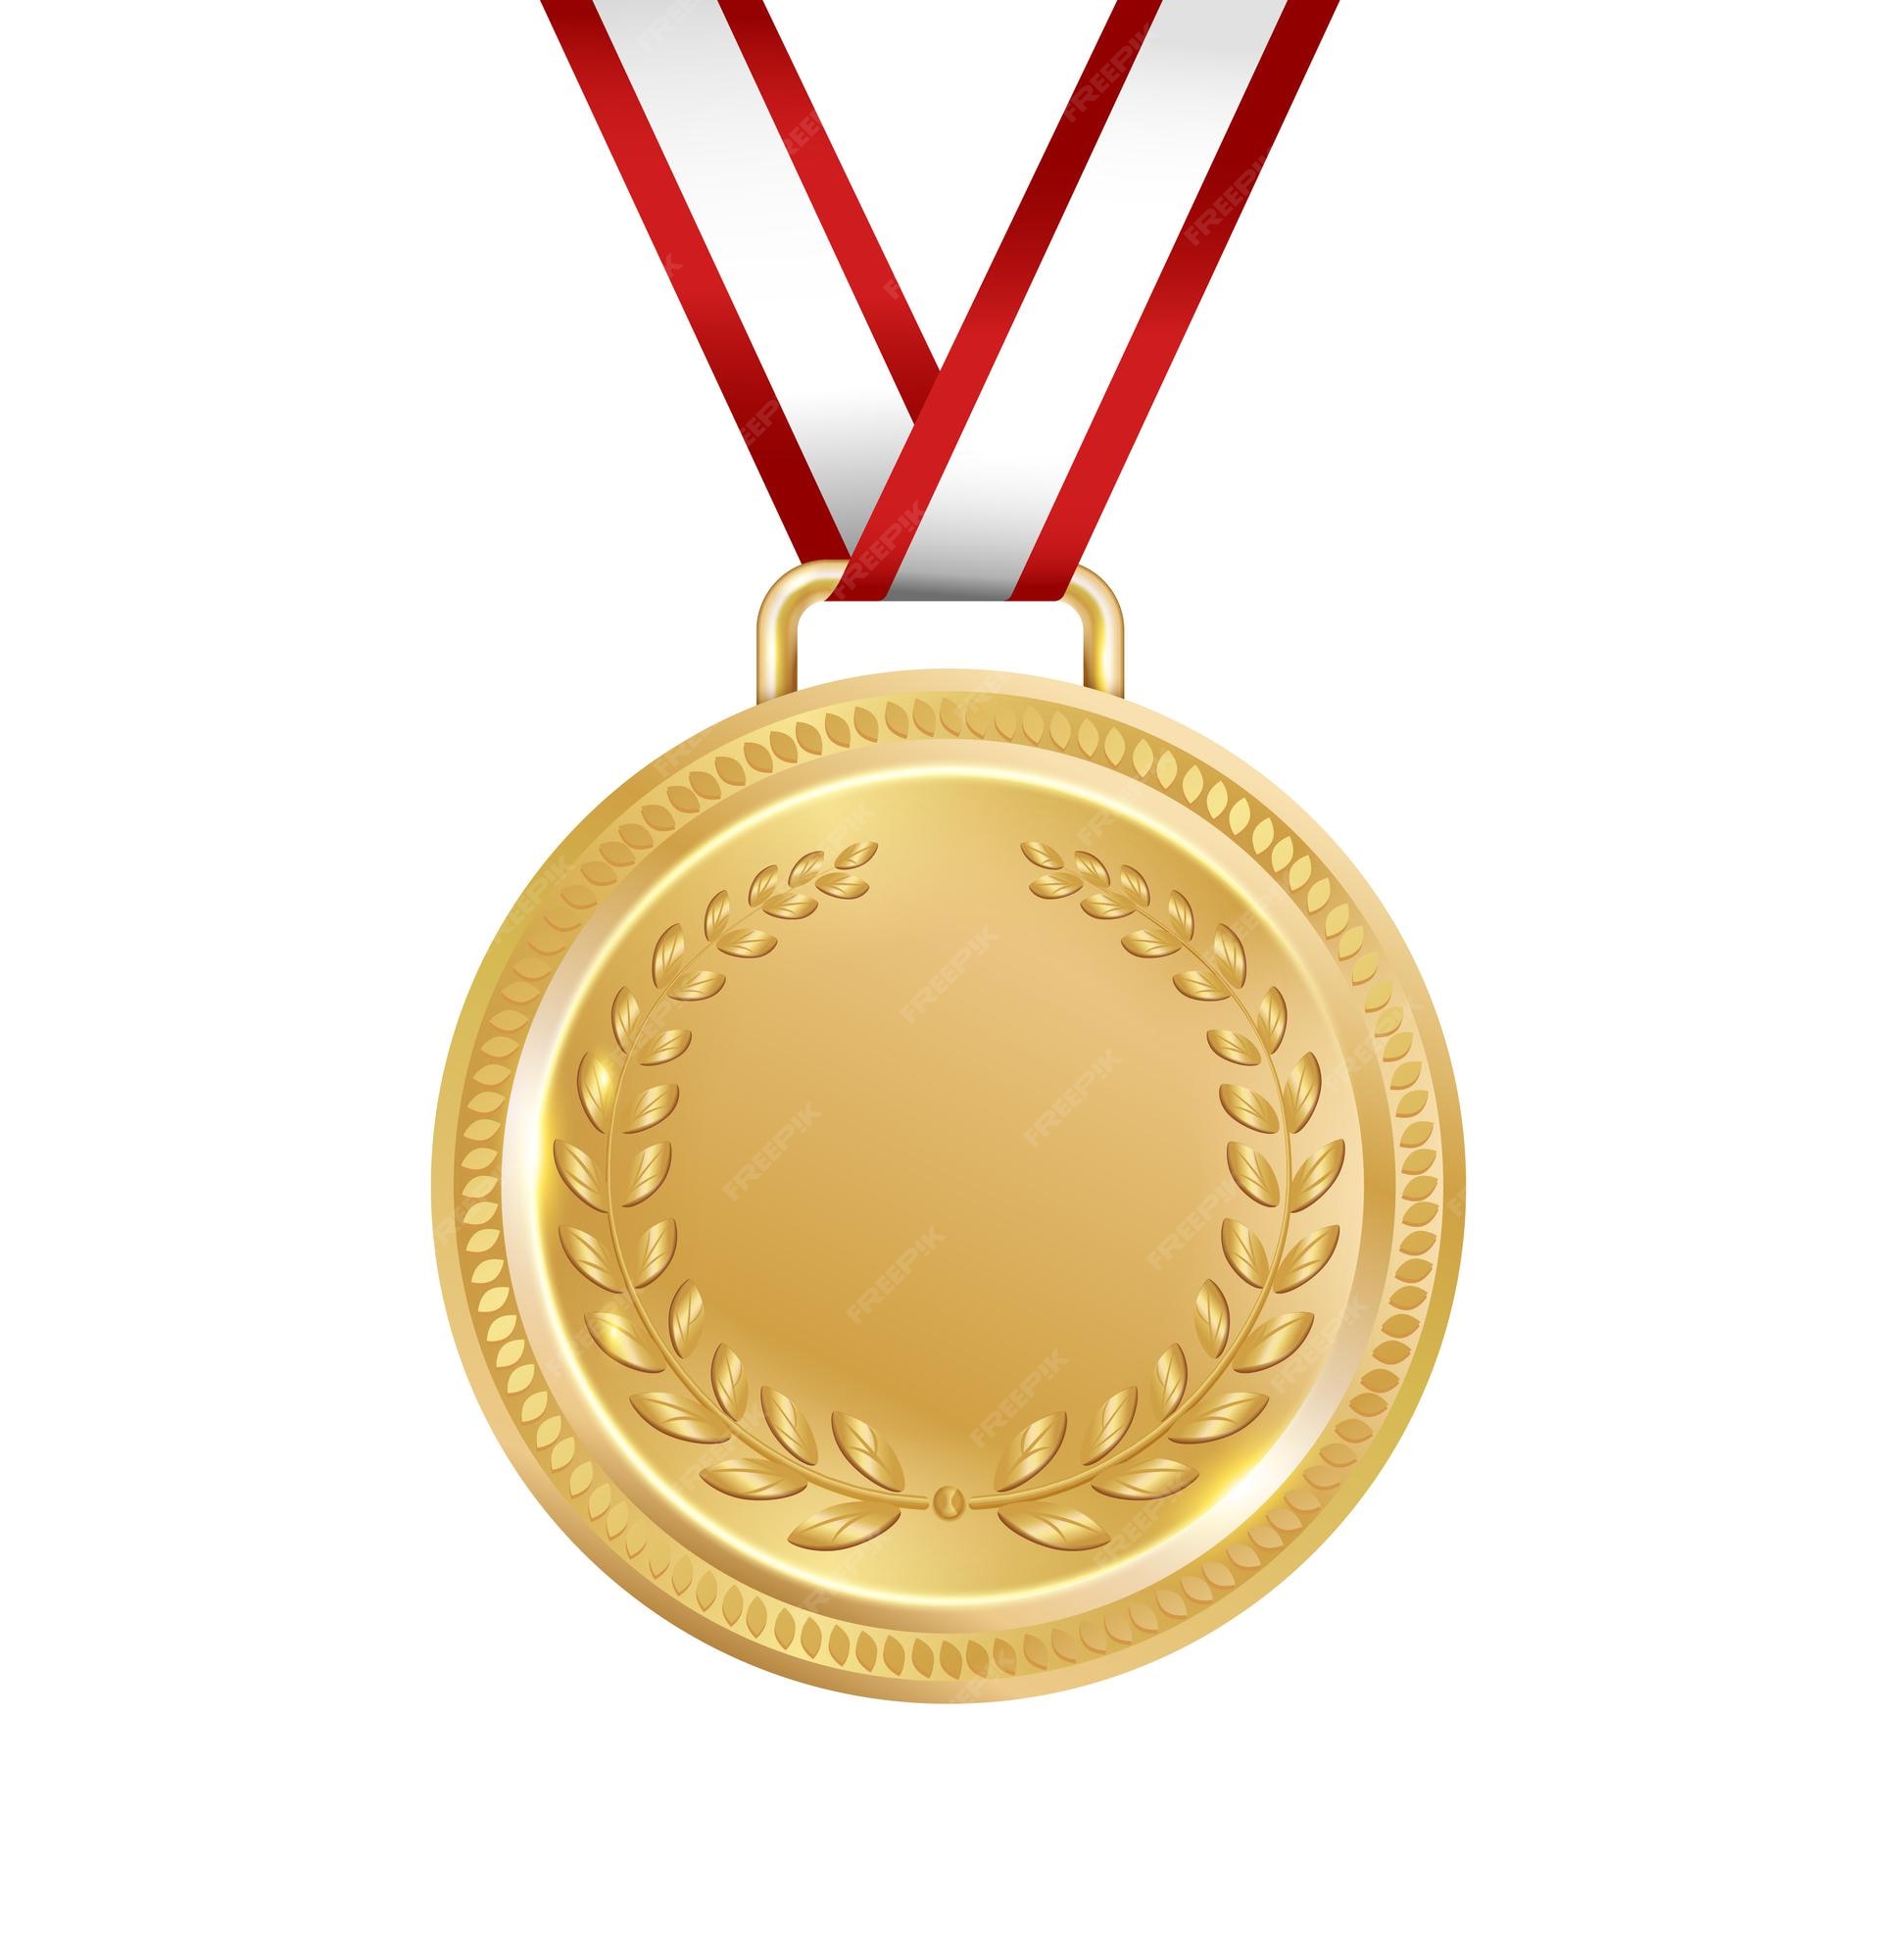 award-medal-realistic-composition-with-isolated-image-medal-with-laurel-wreath-blank-background-vector-illustration_1284-66109.jpg